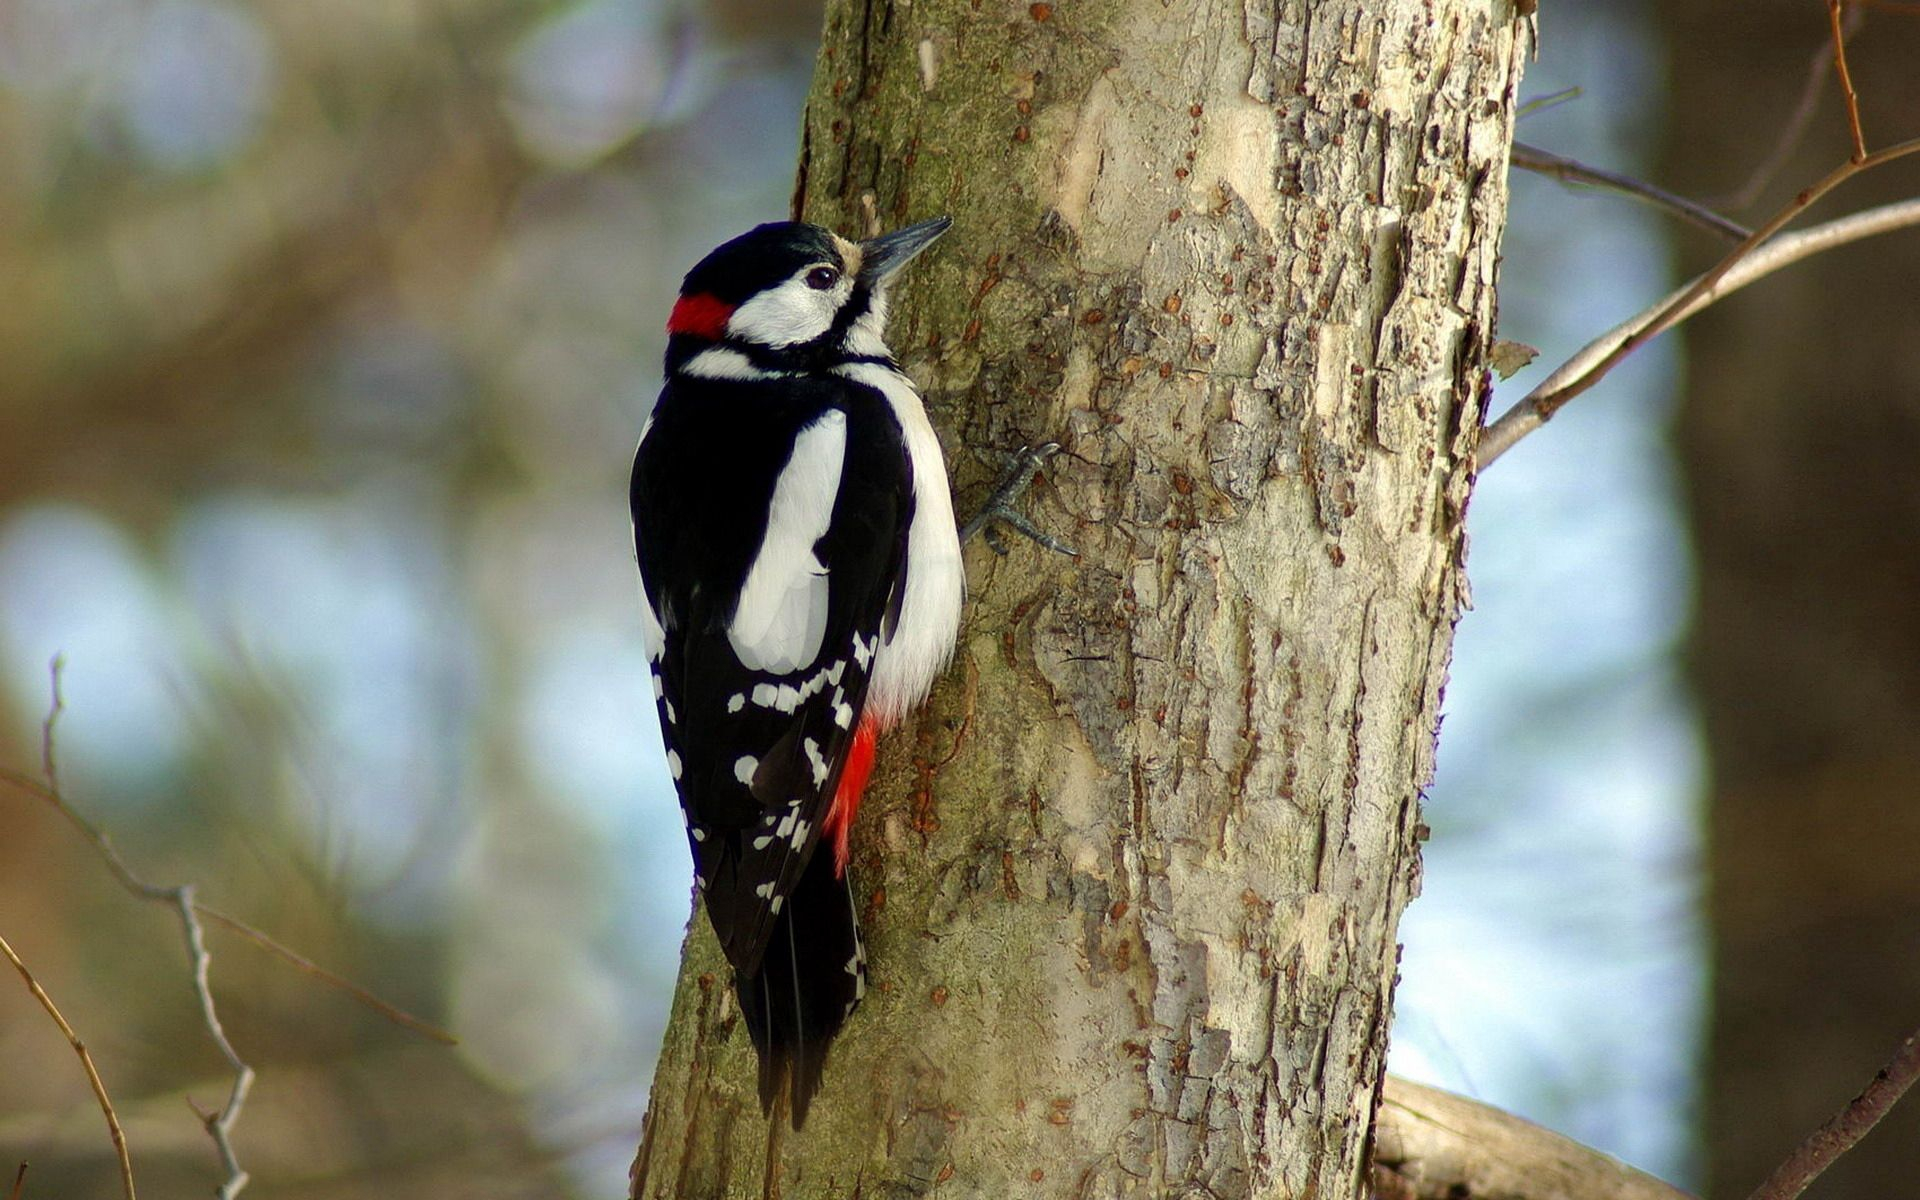 1920x1200 Woodpecker wallpapers for desktop, download free Woodpecker pictures and backgrounds for PC